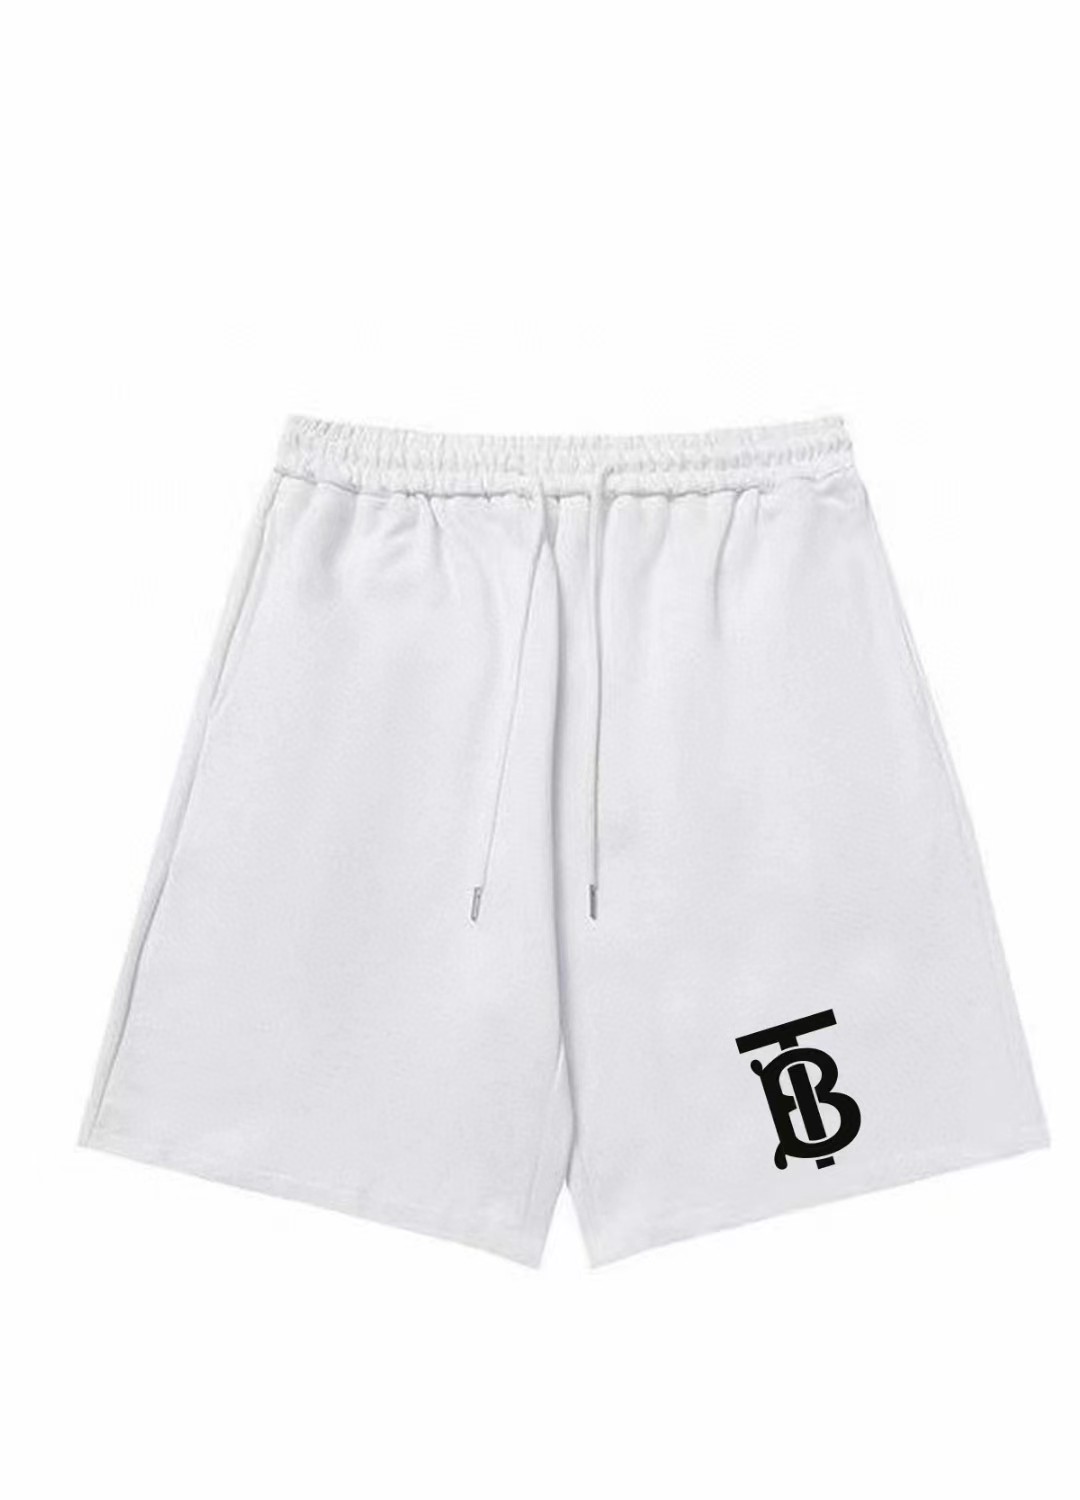 Burberry Clothing Shorts Black White Printing Unisex Spring/Summer Collection Fashion